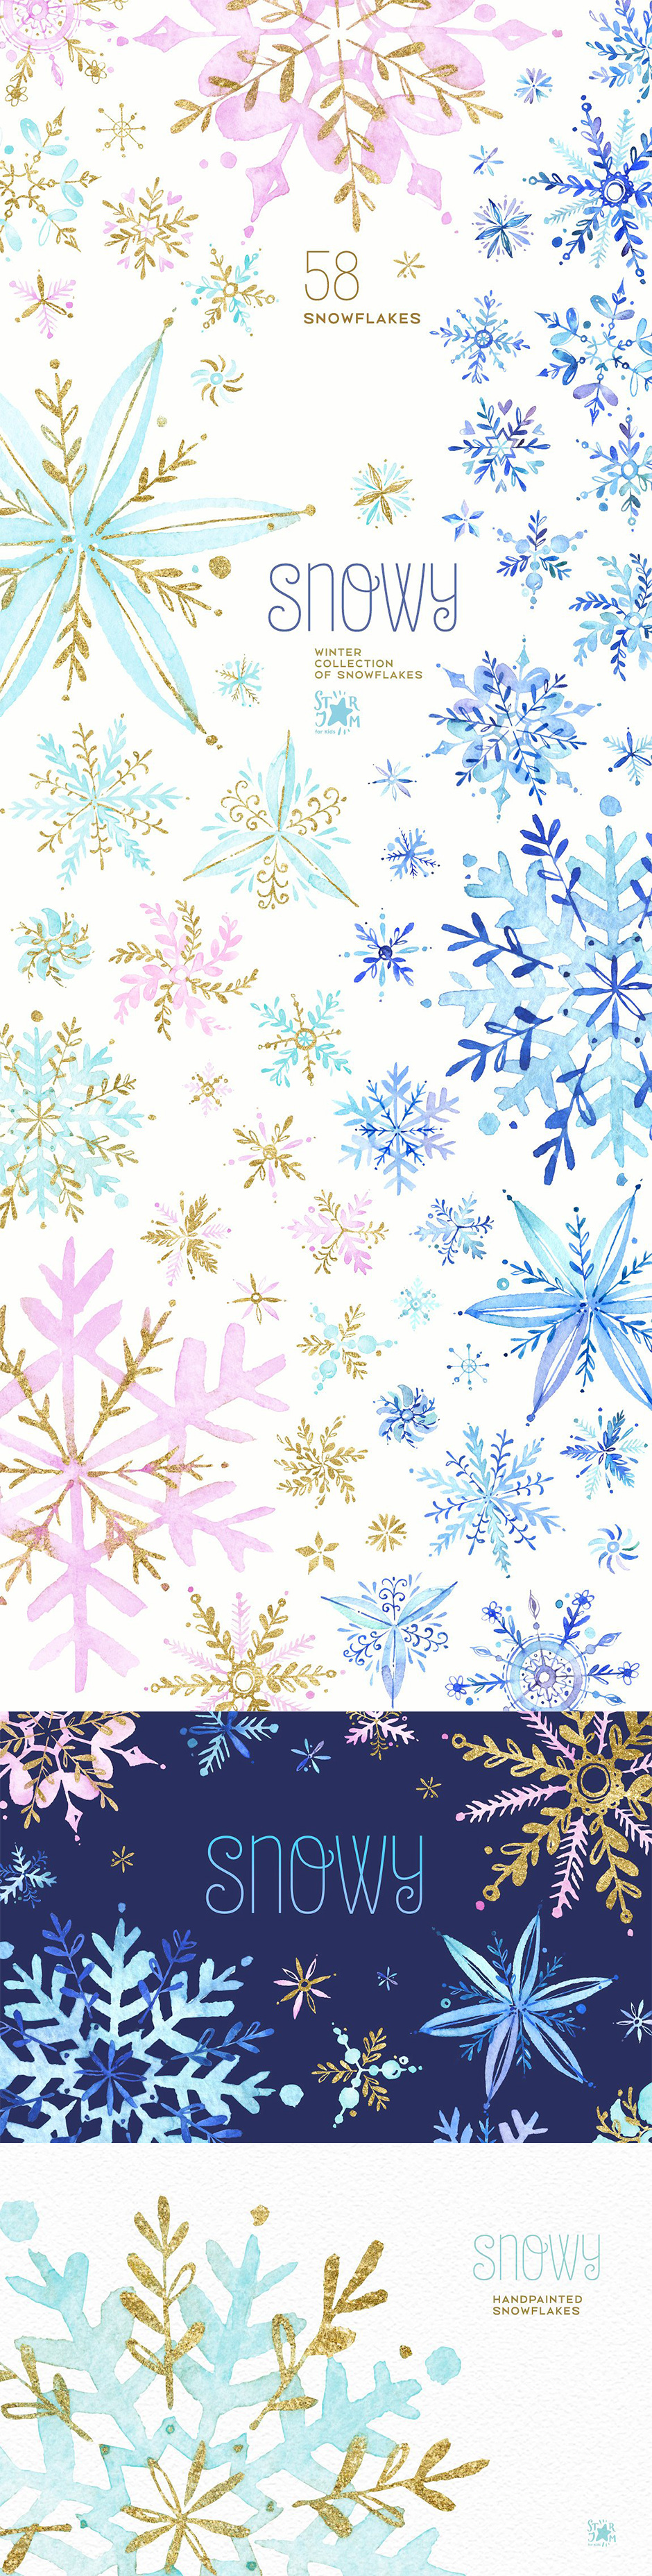 Snowy Holiday Snowflakes